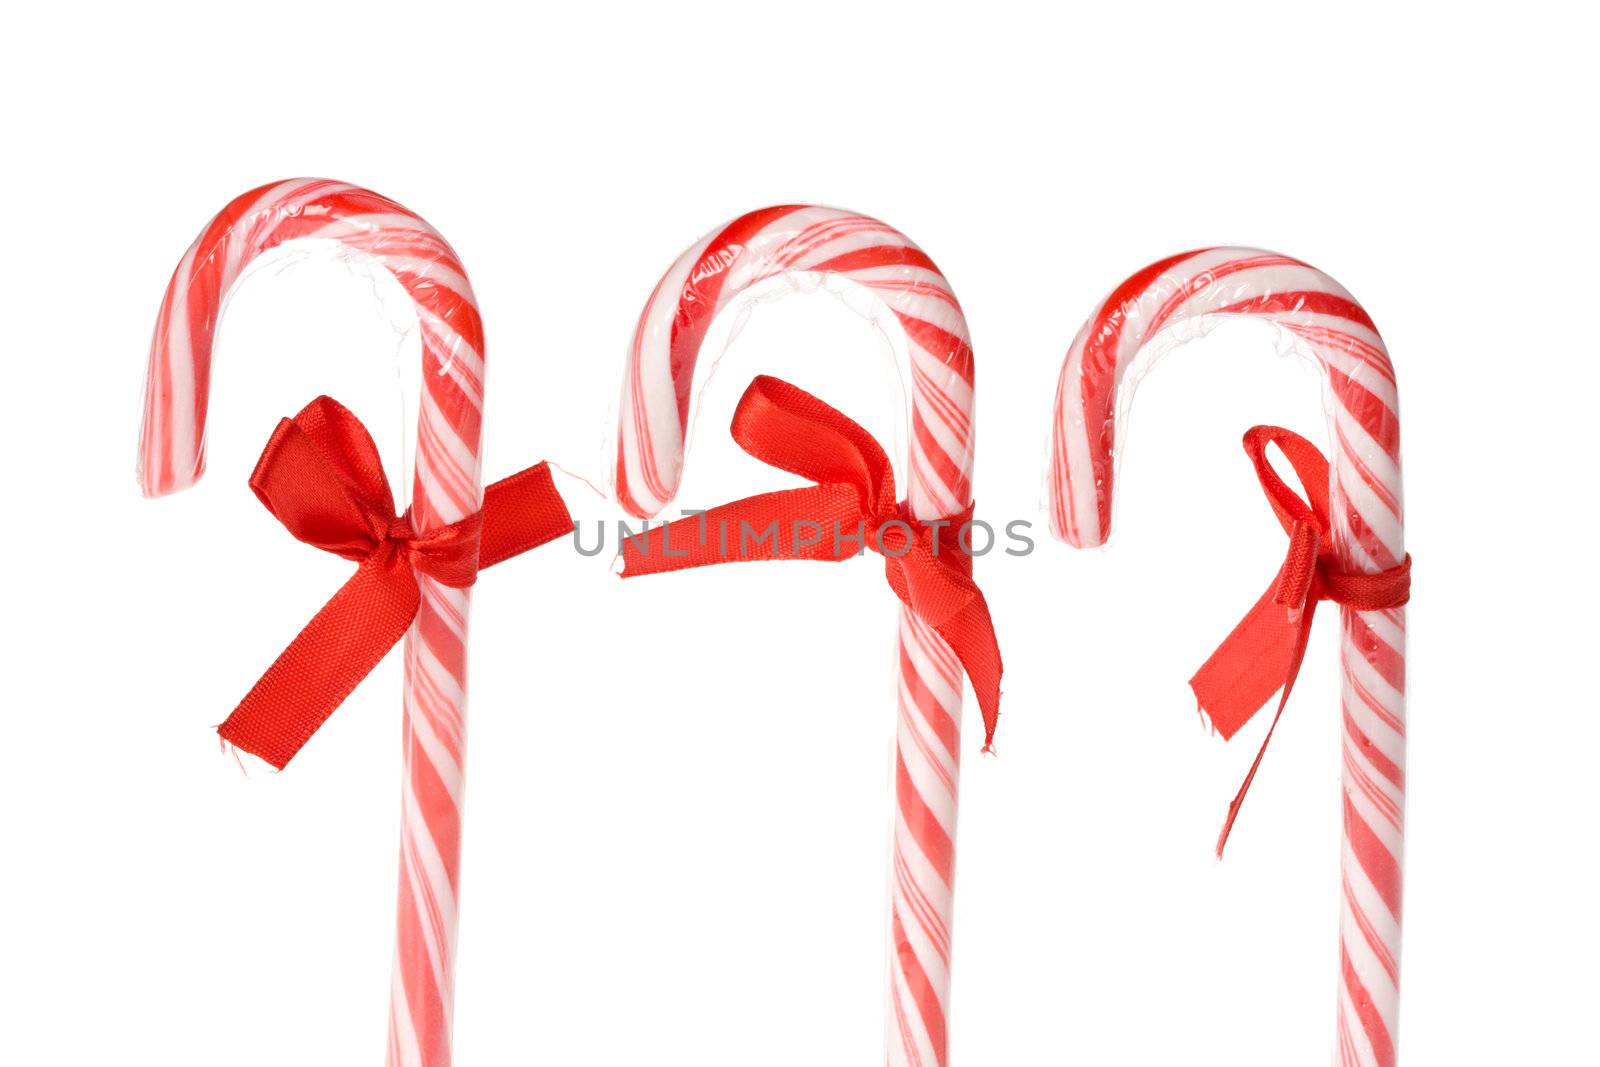 candy canes isolated on white background by bernjuer